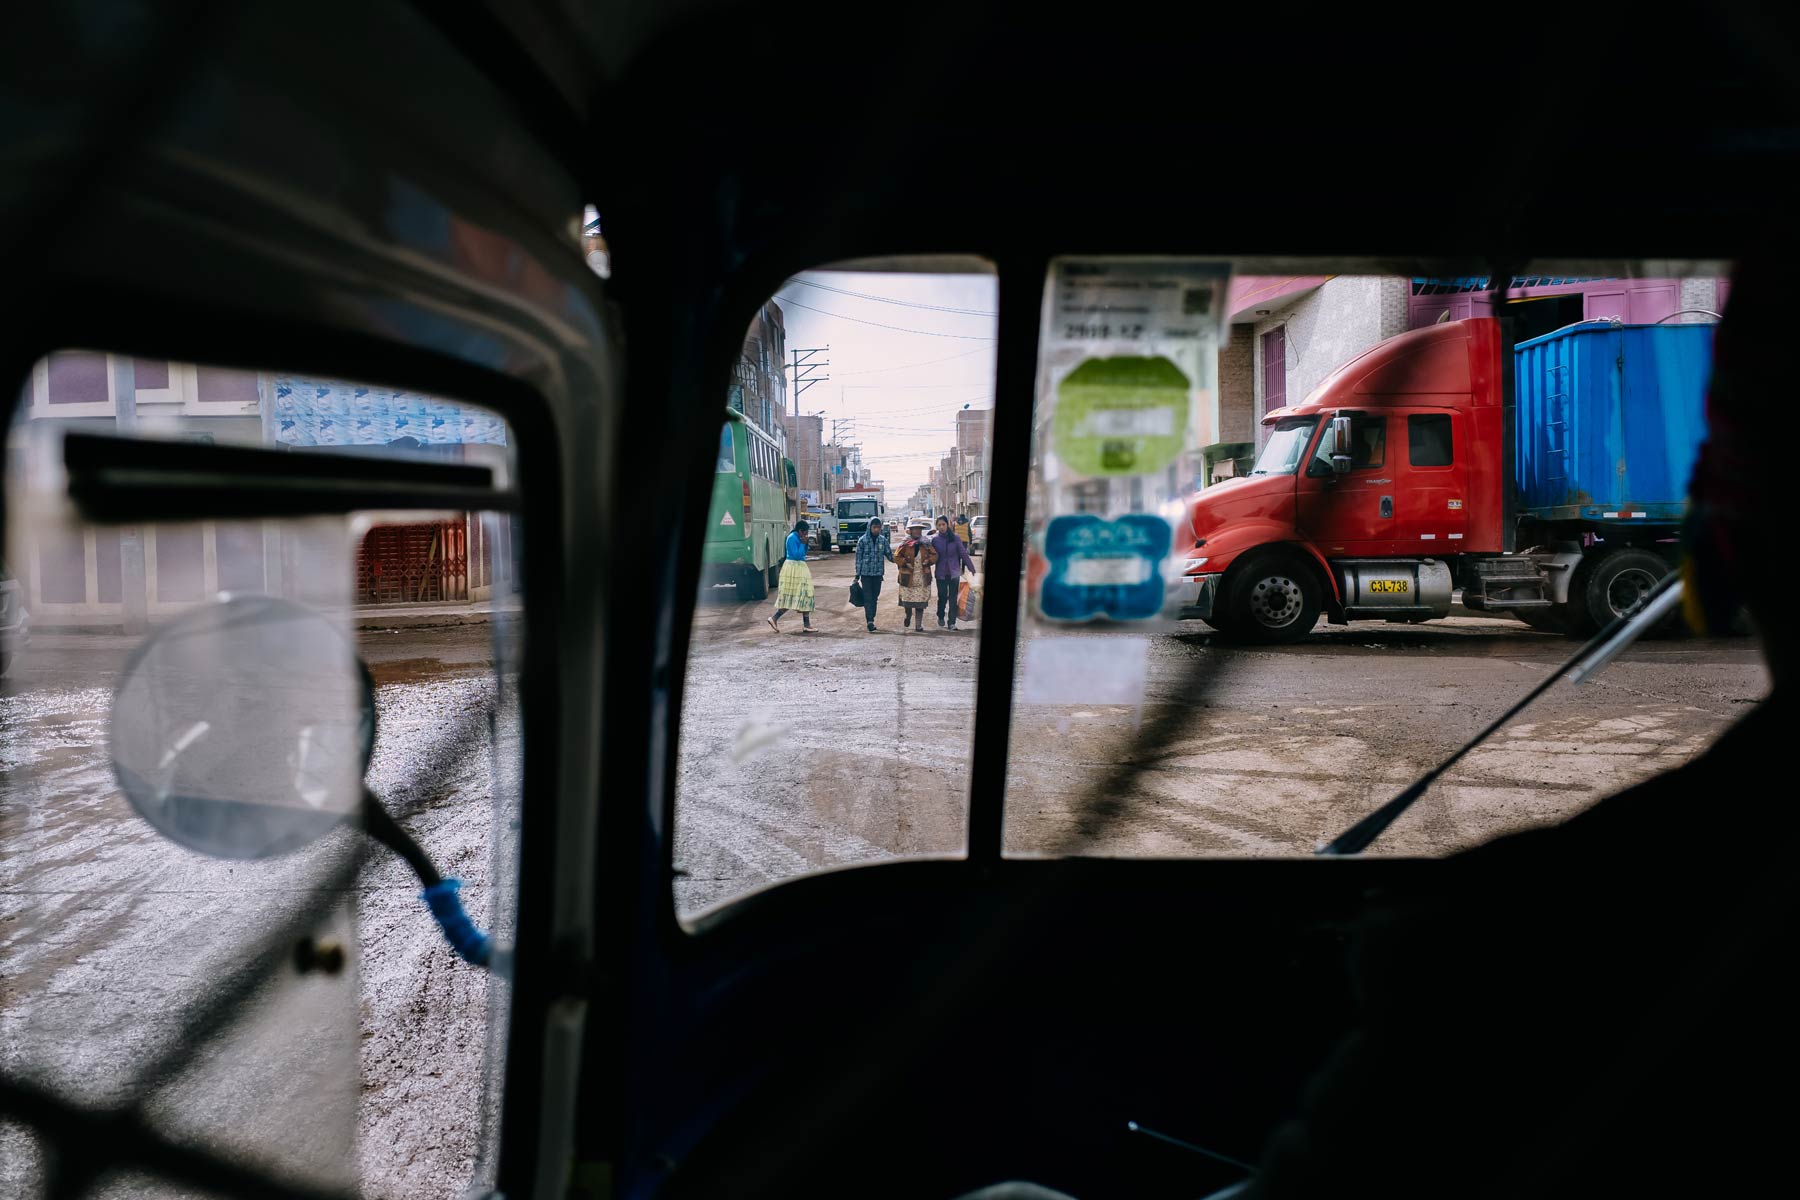  View from within a moto-taxi in Juliaca.